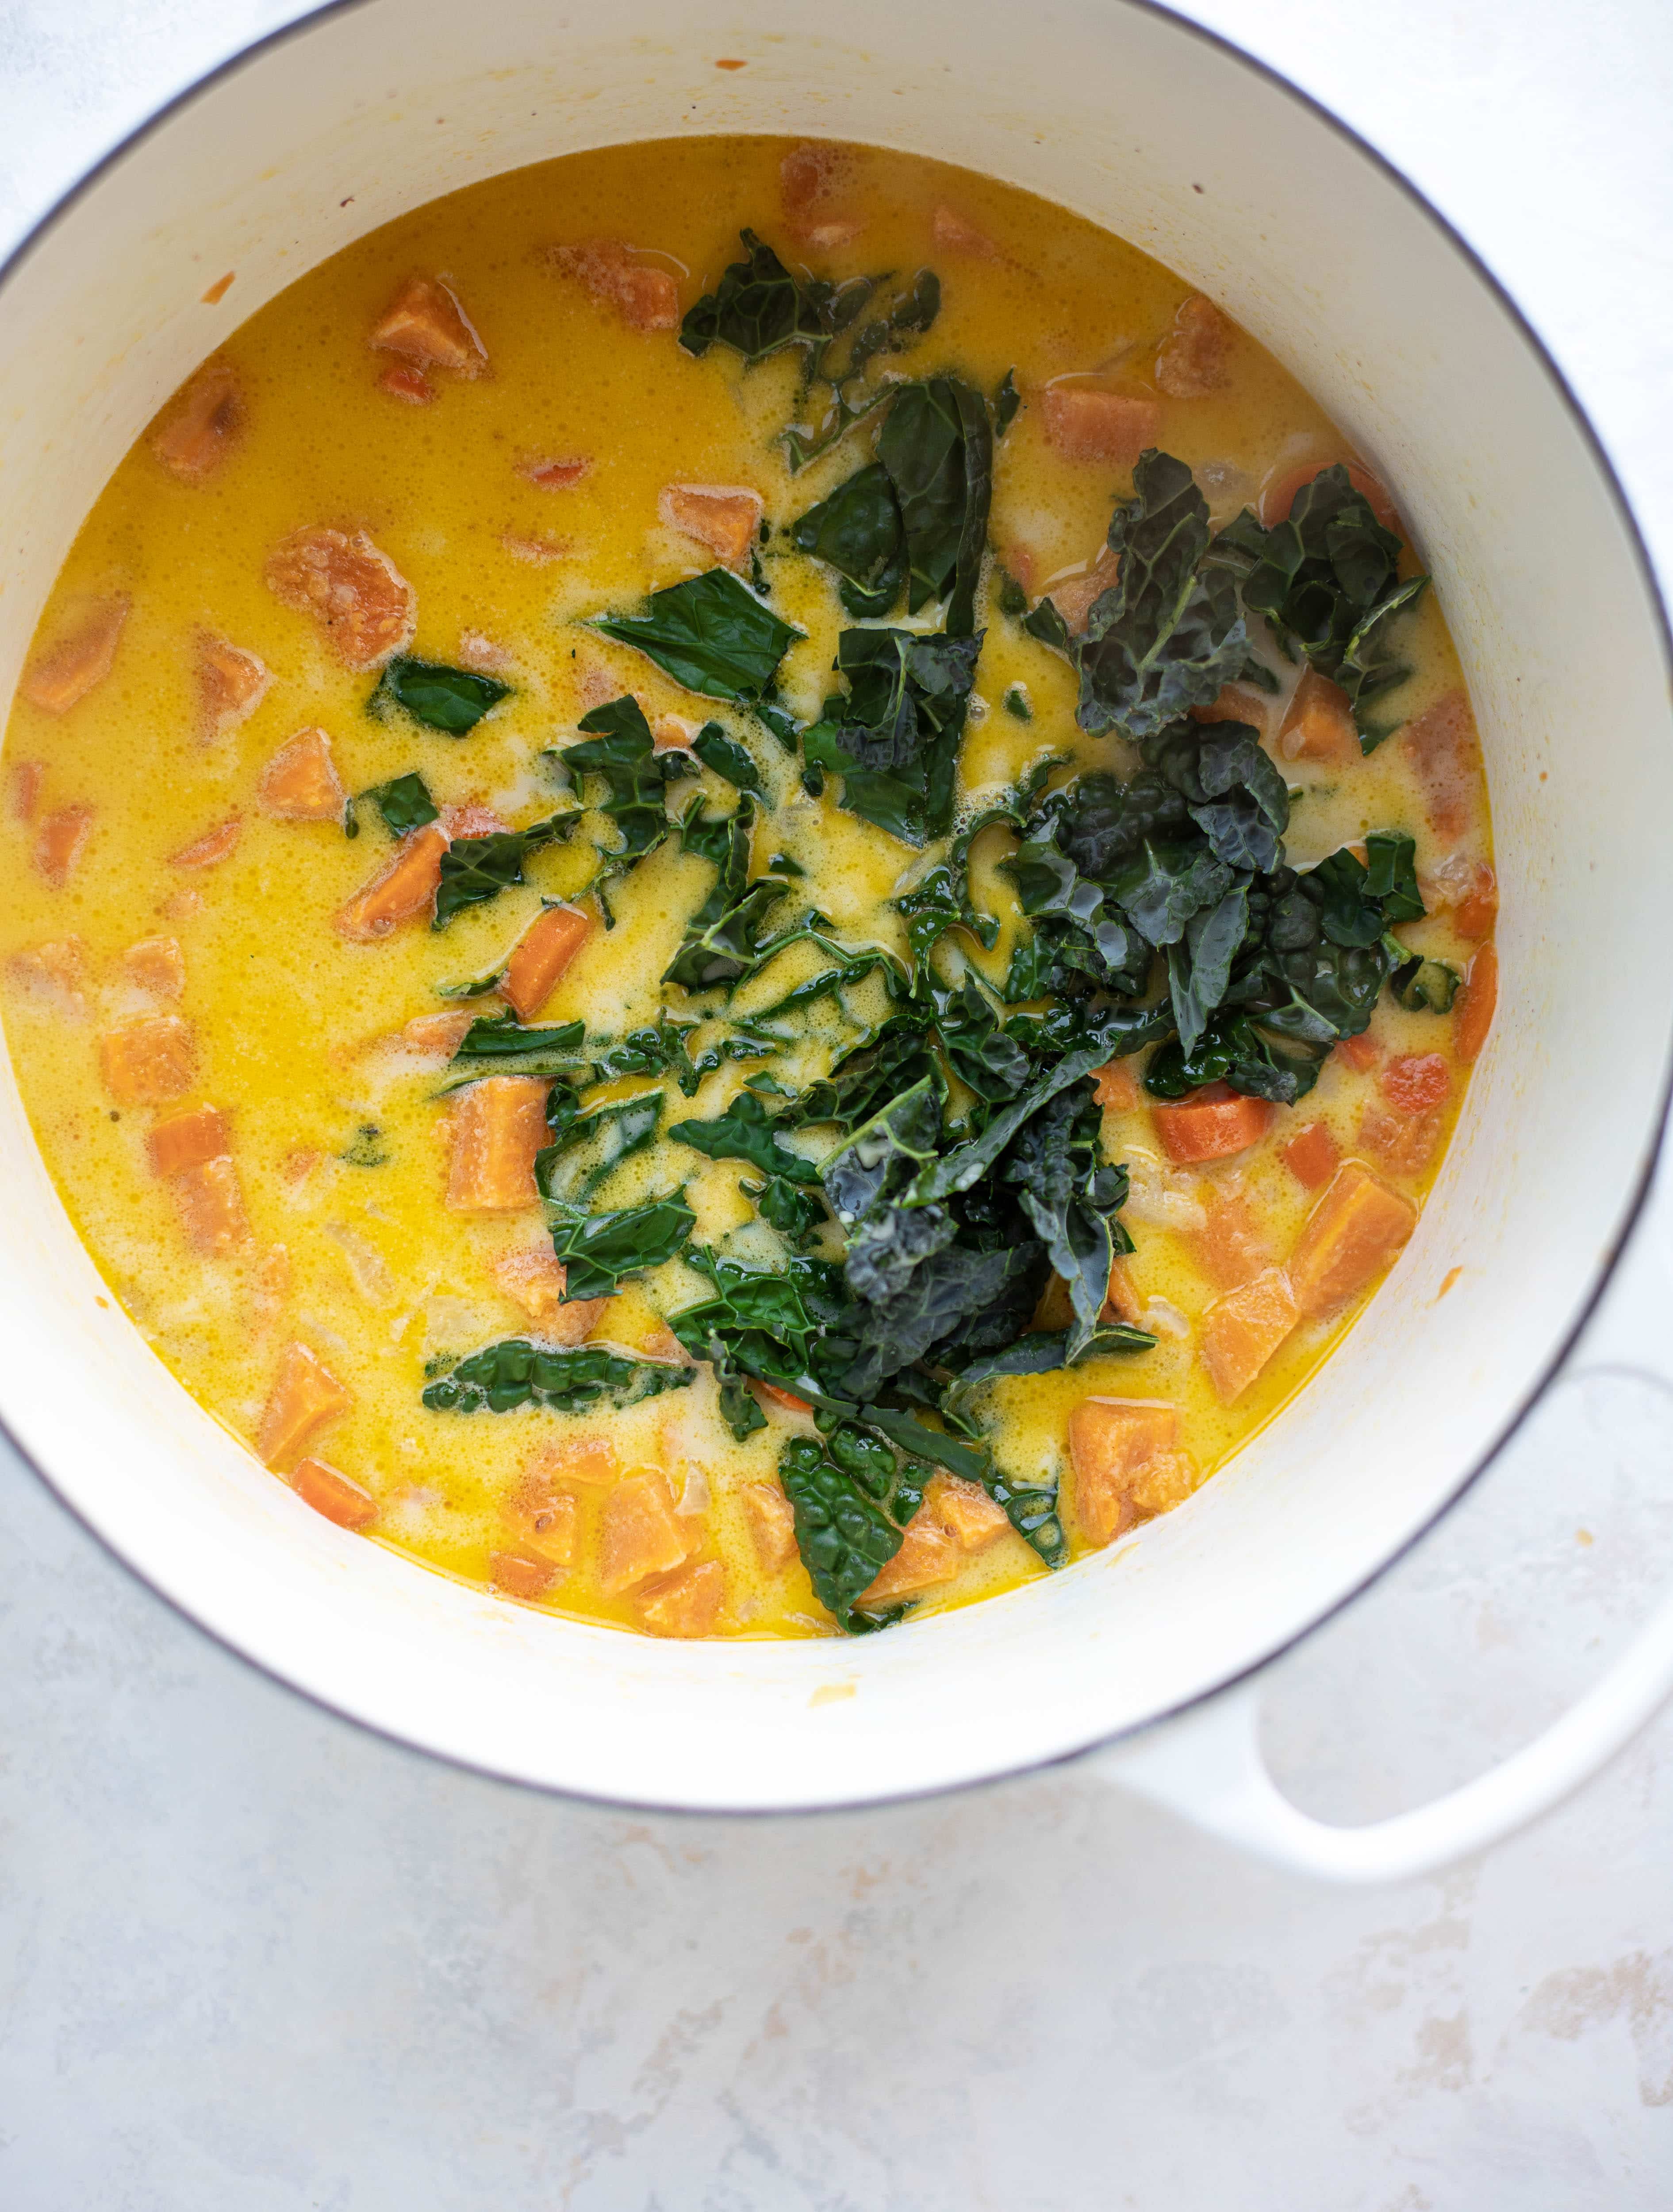 This sweet potato chowder is a hug in a bowl! Made with lots of greens and crunchy pancetta and pepitas for topping, it's a perfect weeknight meal.